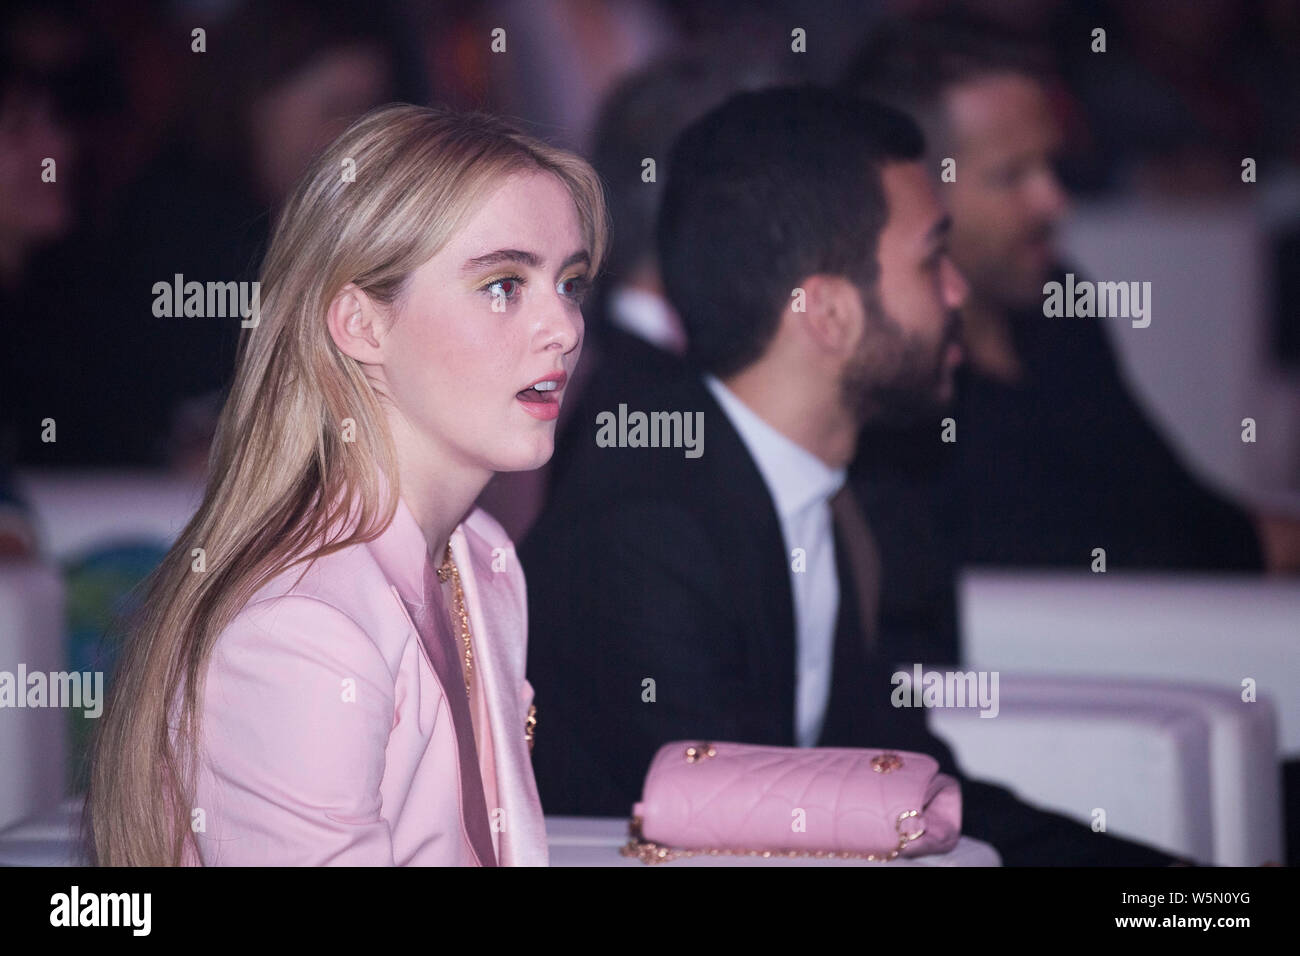 American actress Kathryn Newton attends a press conference for new movie 'Pokemon Detective Pikachu' in Beijing, China, 21 April 2019. Stock Photo